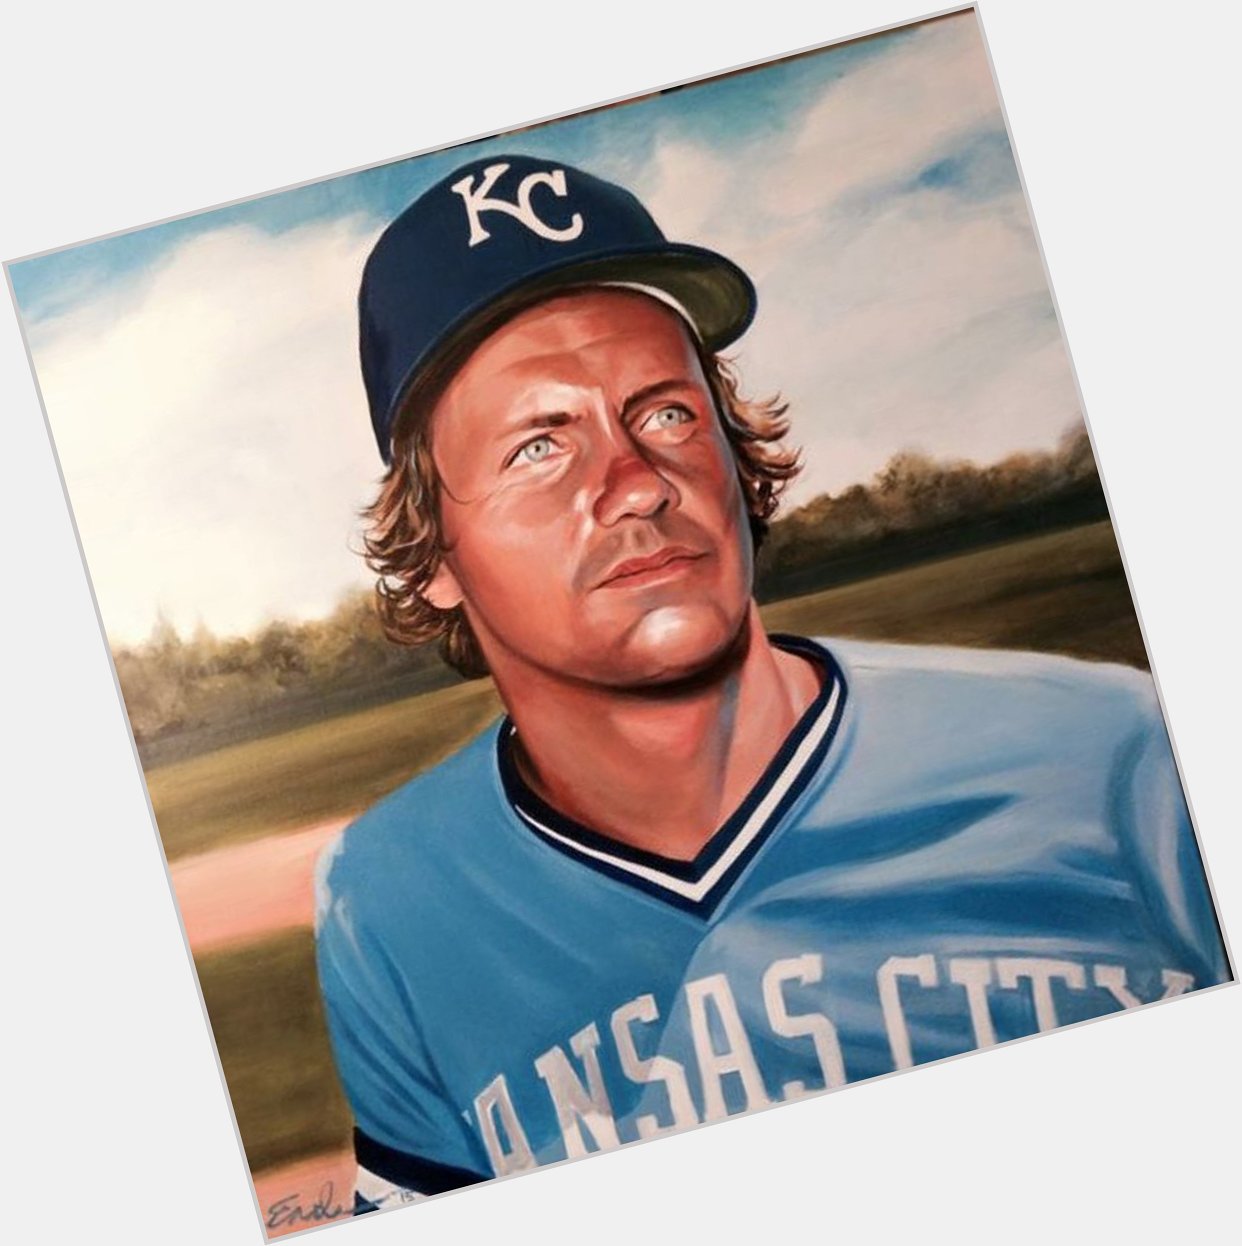 Happy birthday to the greatest Royal of all time, George Brett! 